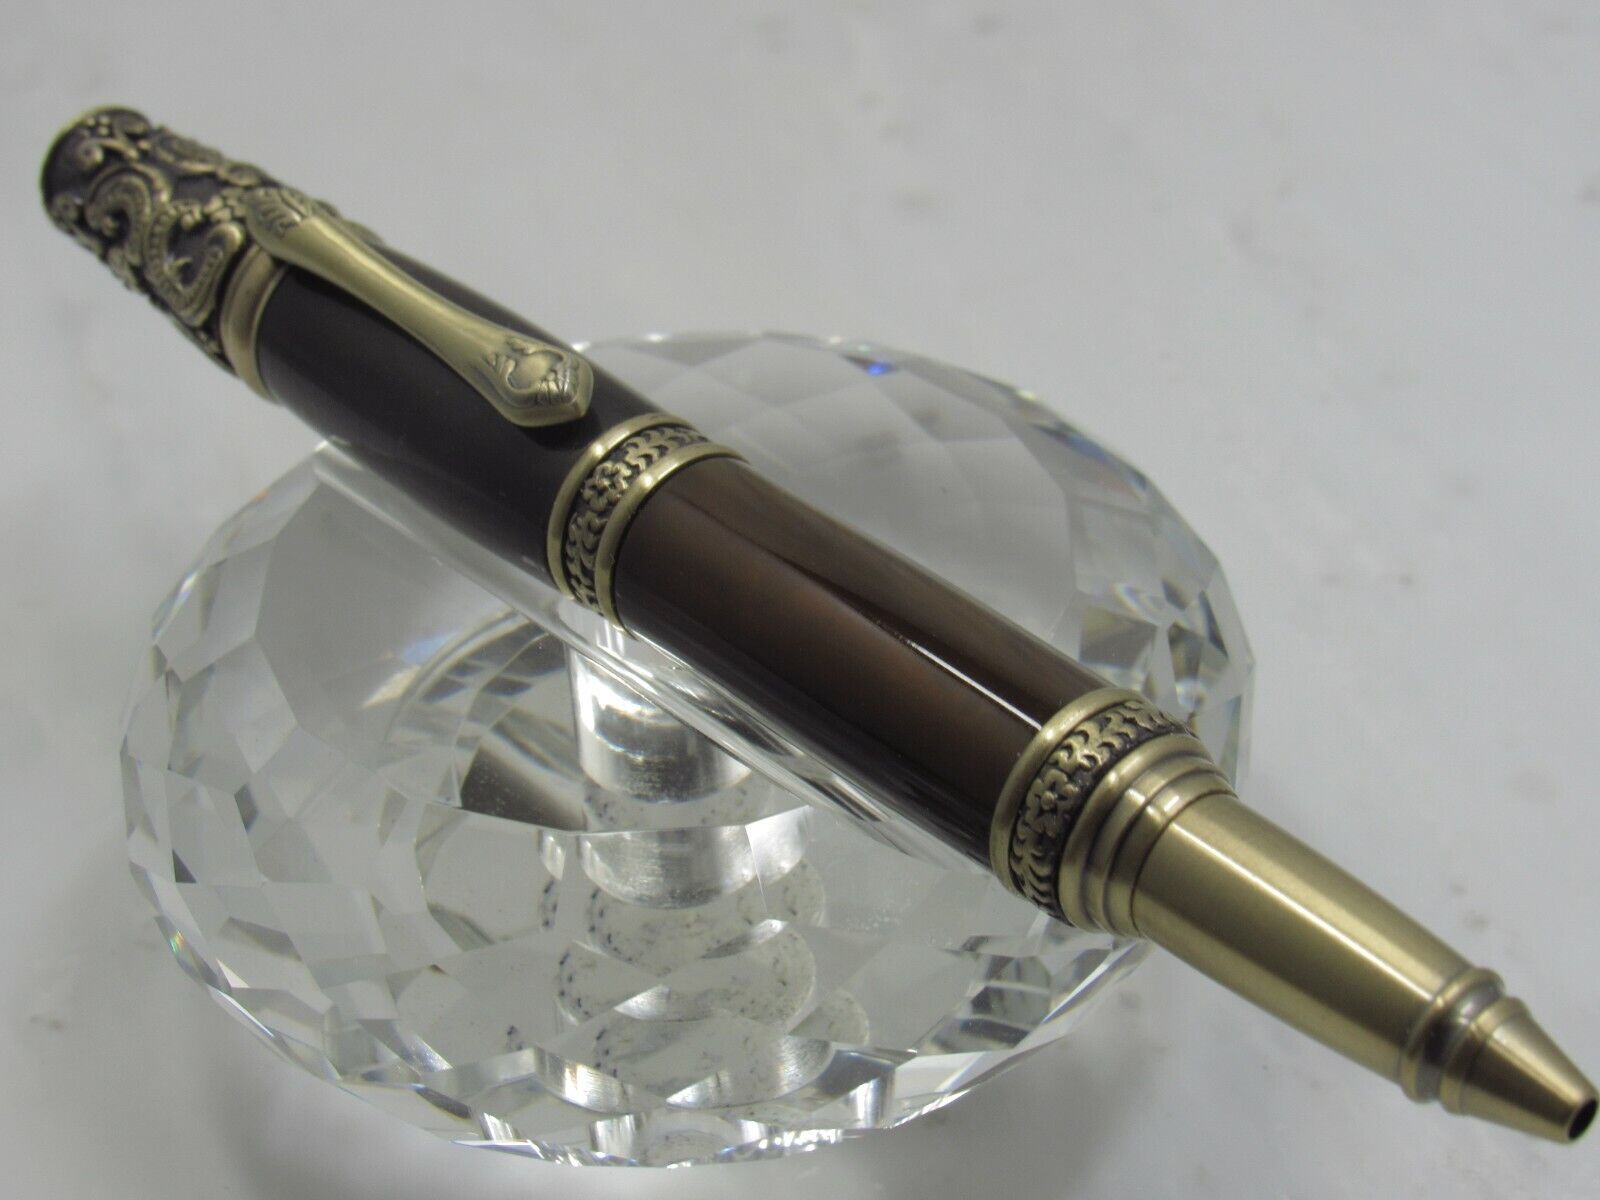 GORGEOUS HIGH QUALITY HANDMADE VICTORIAN COCOBOLO WOOD TWIST BALL POINT PEN